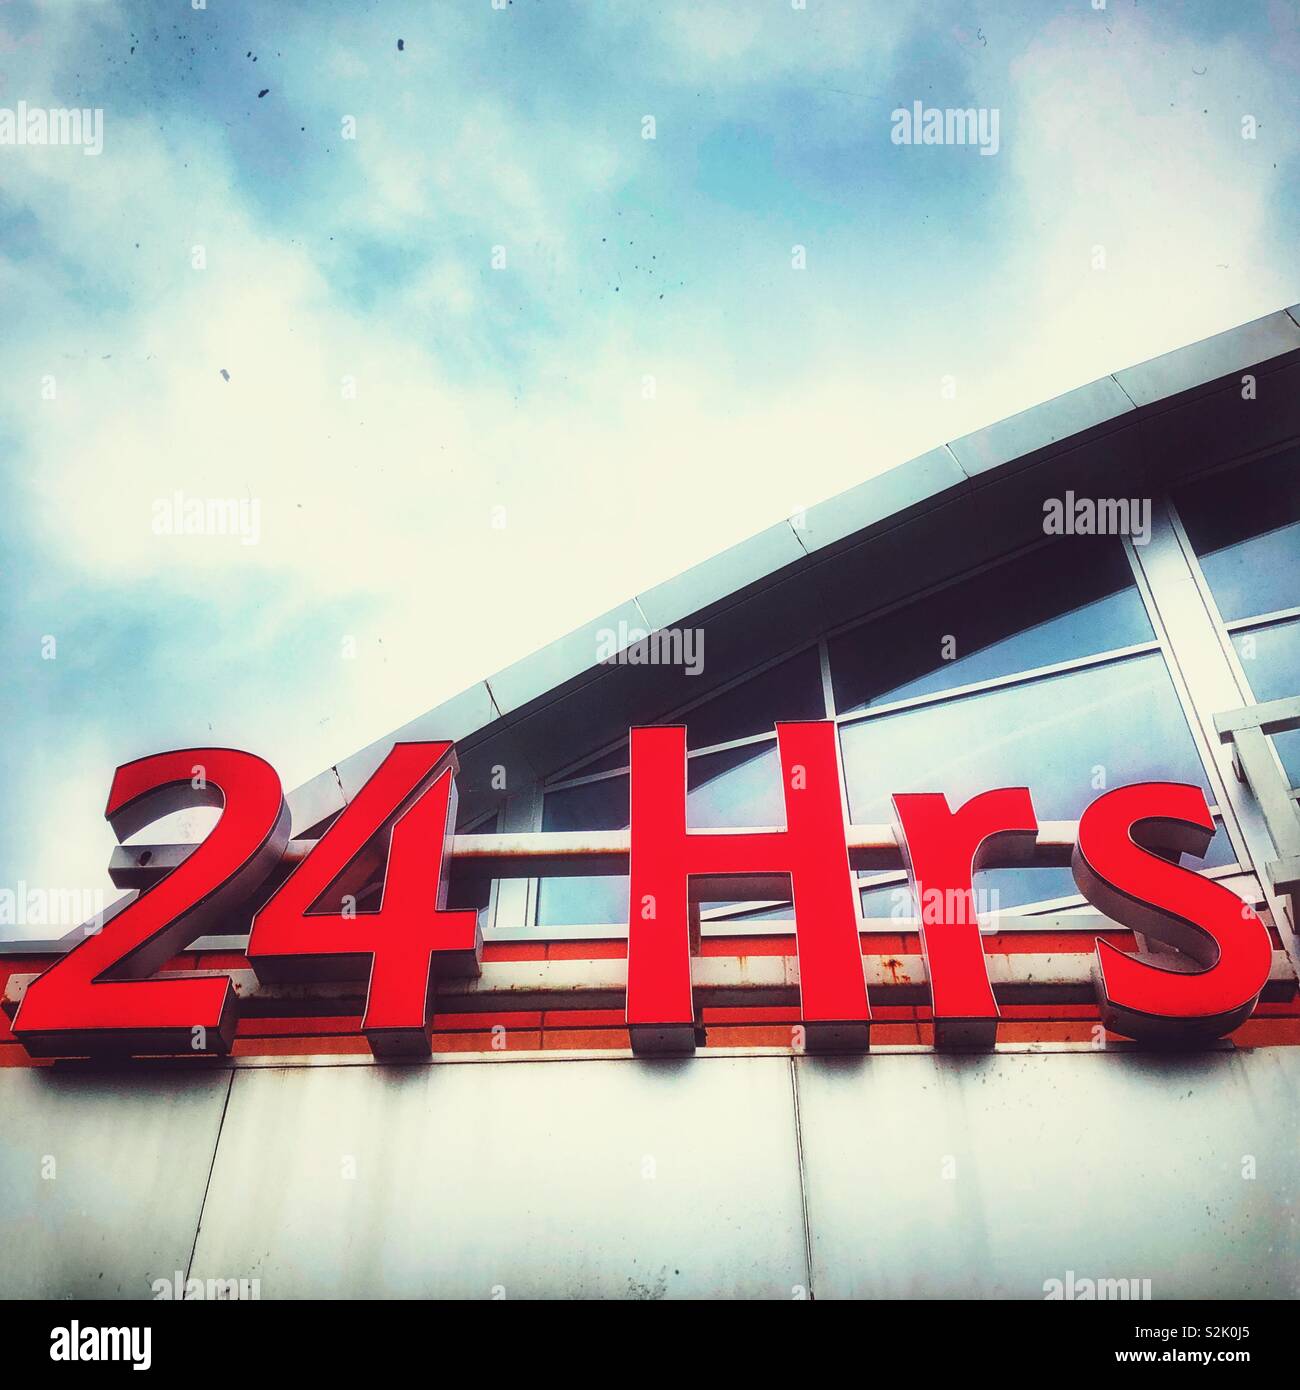 24 Hrs sign on the top of a grocery store Stock Photo